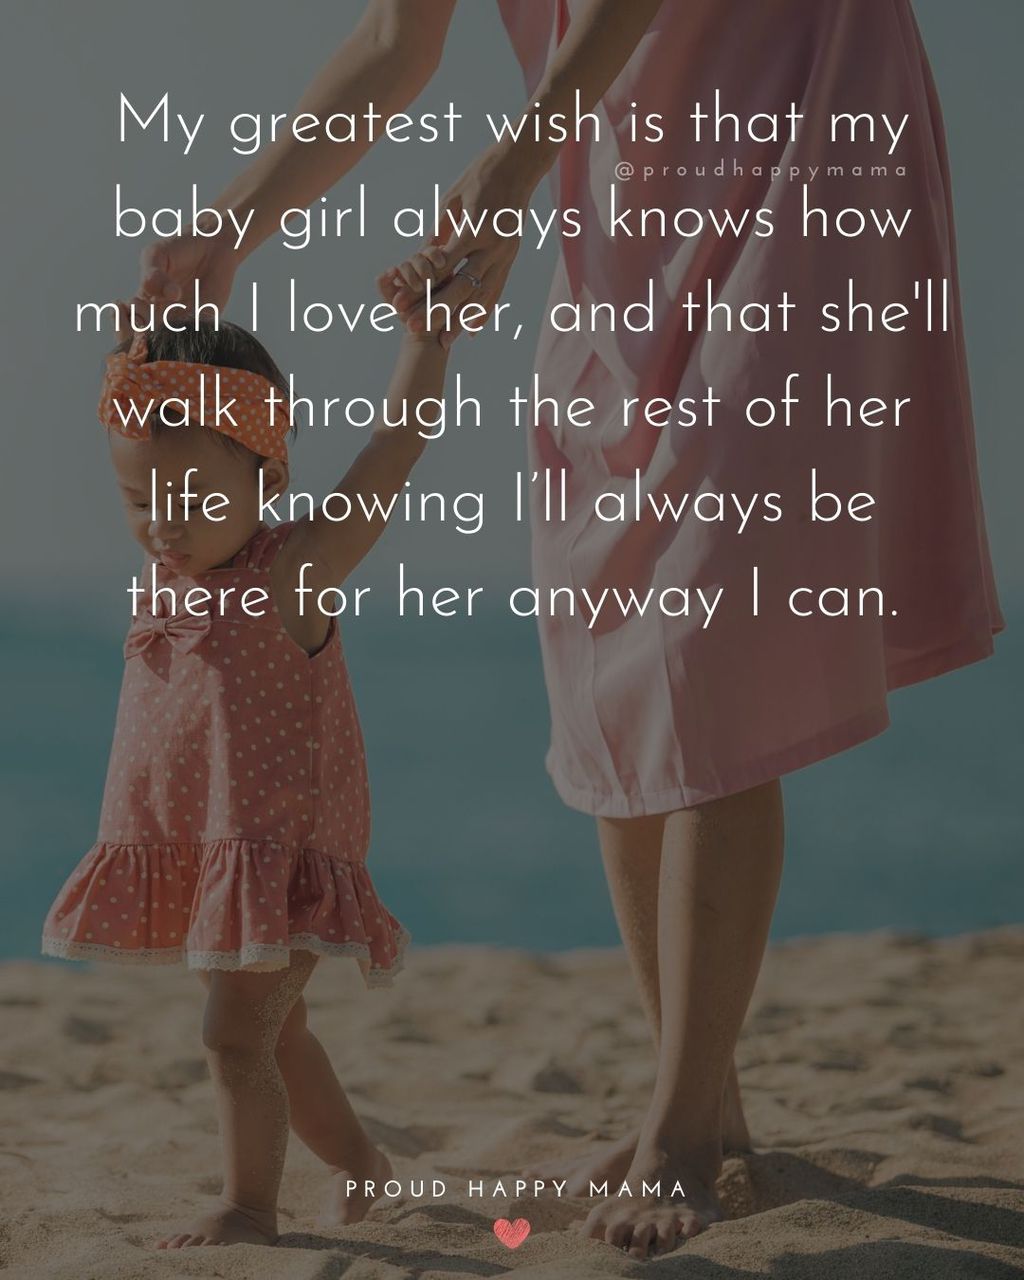 Baby Girl Quotes - My greatest wish is that my baby girl always knows how much I love her, and that they walk through the rest of their life knowing I’ll always be there for her anyway I can.